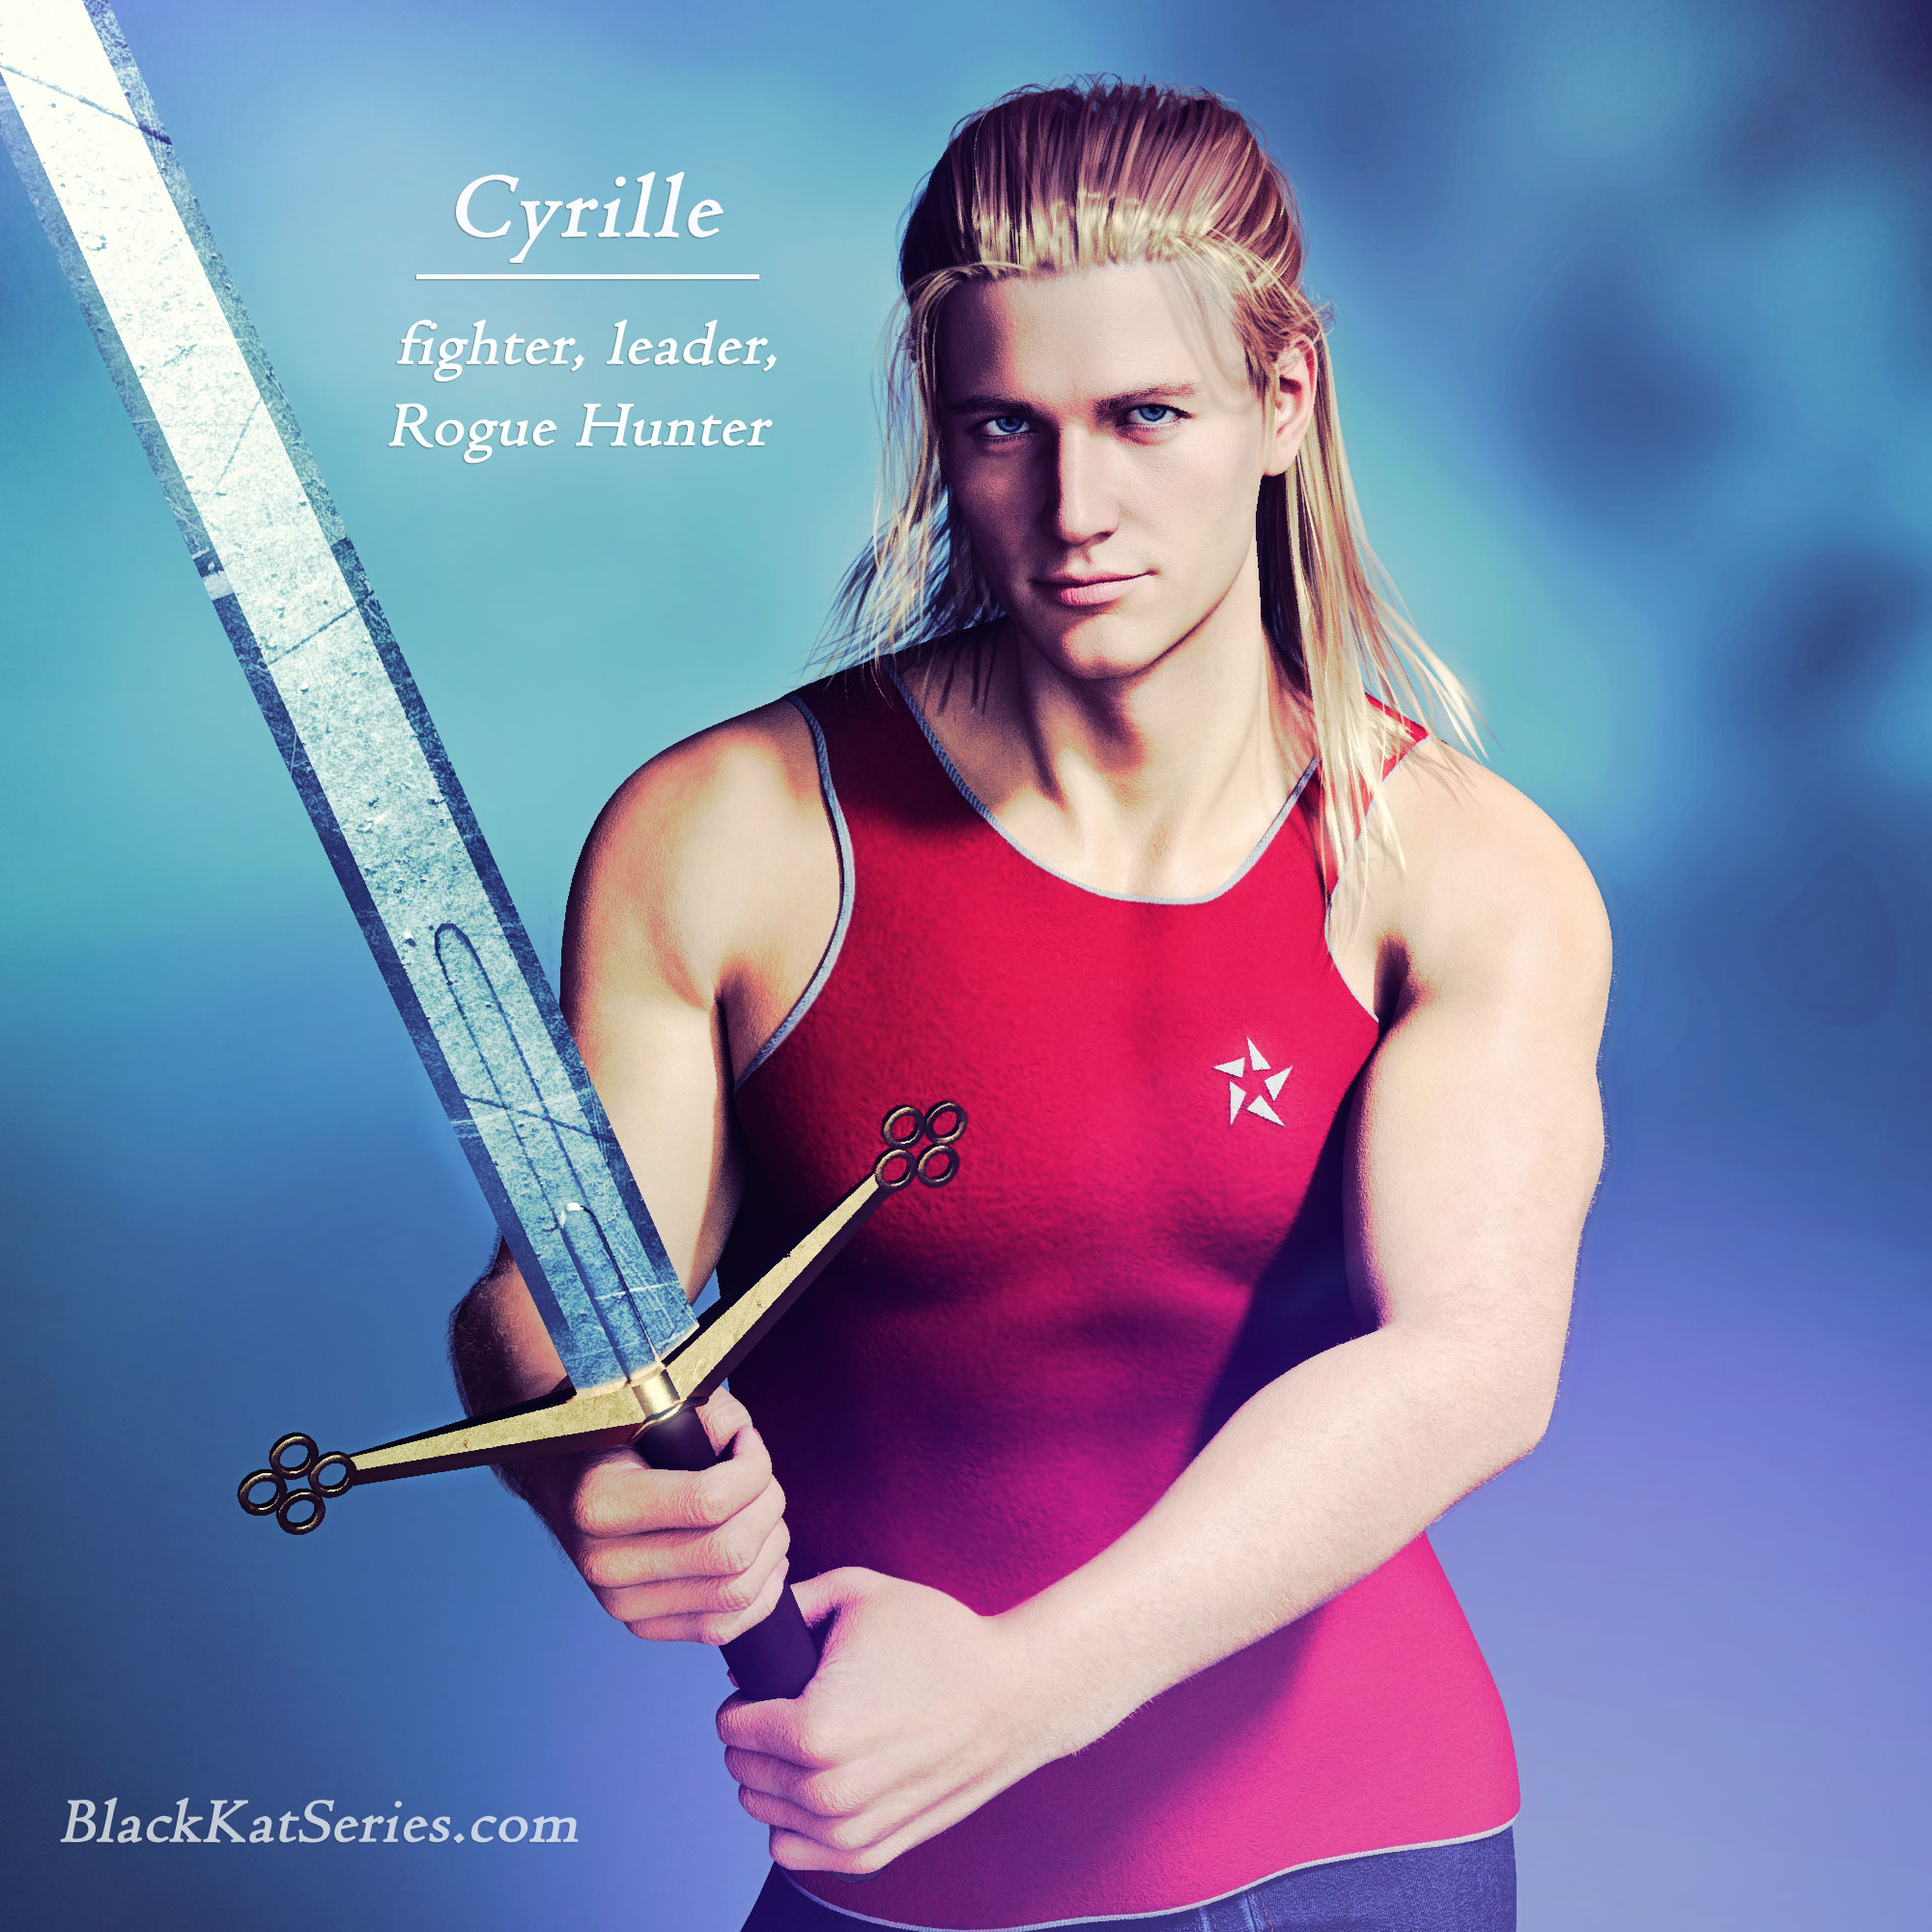 Meet the Supers: Cyrille